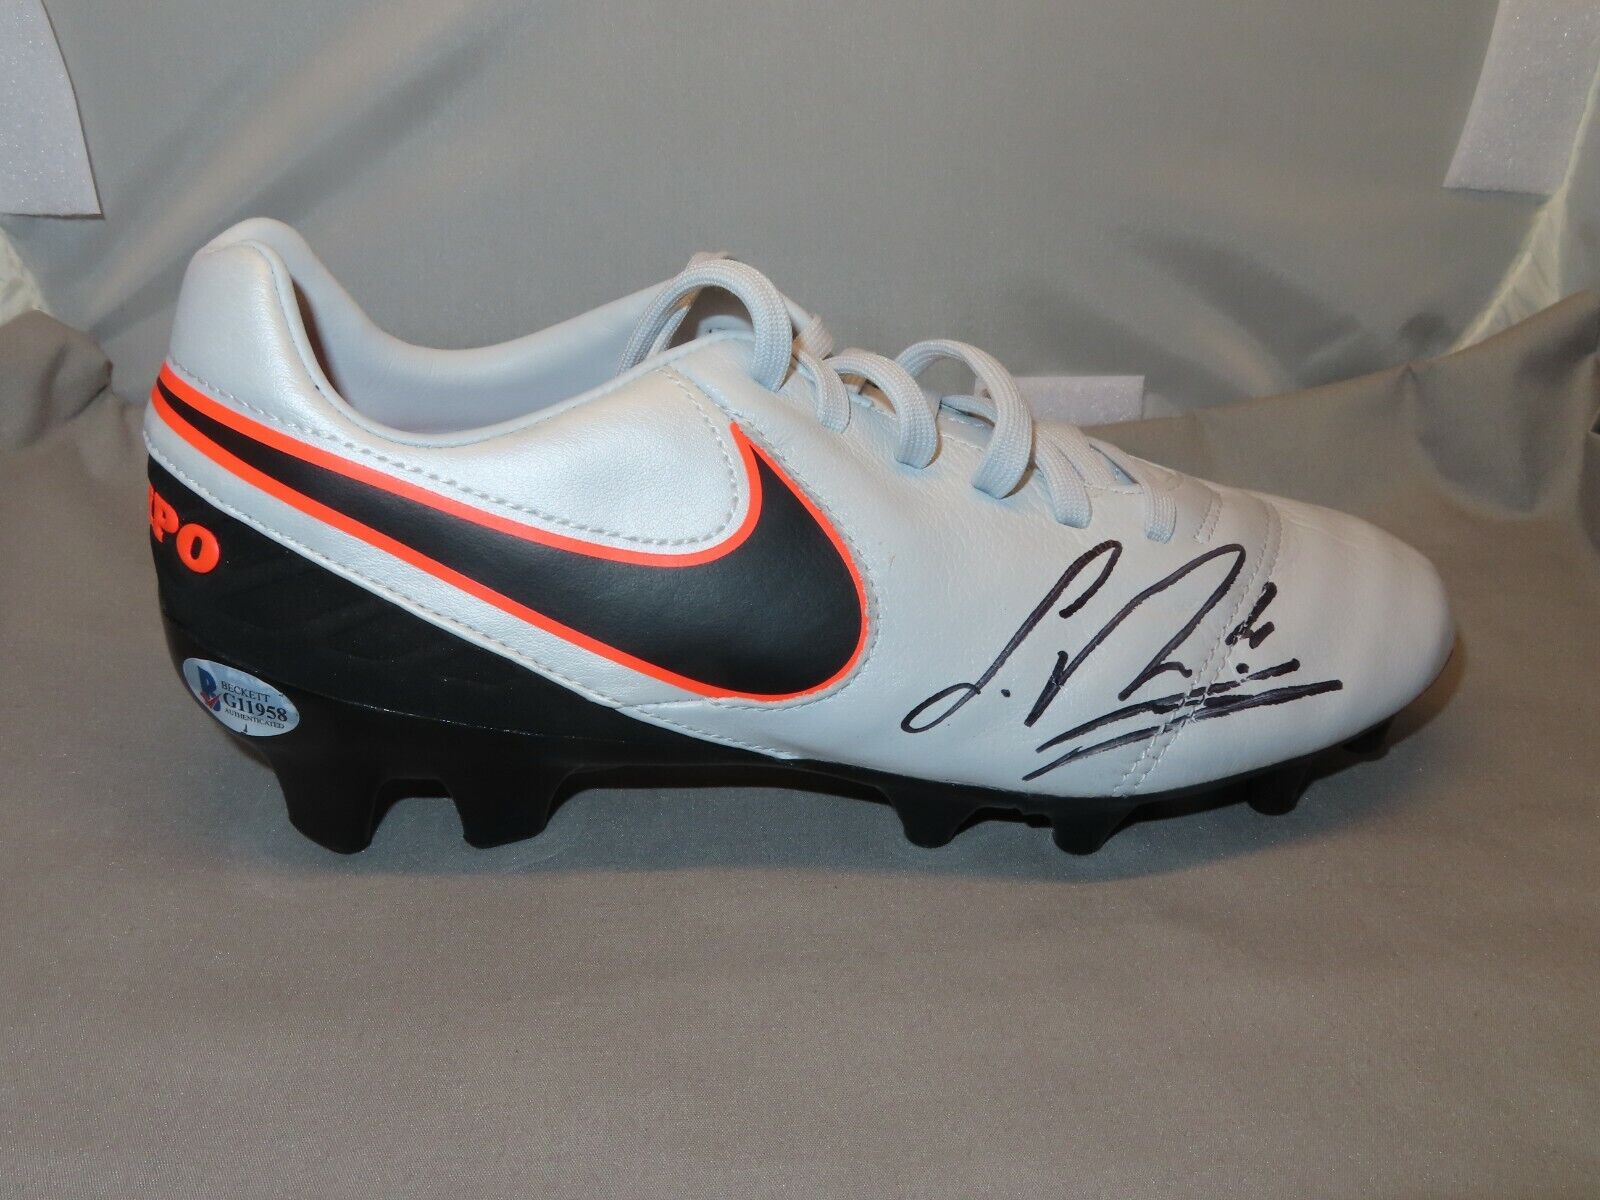 Sergio Autographed Signed Nike Tiempo Soccer Cleat Auto Size 6 1/2 Beckett Beckett COA